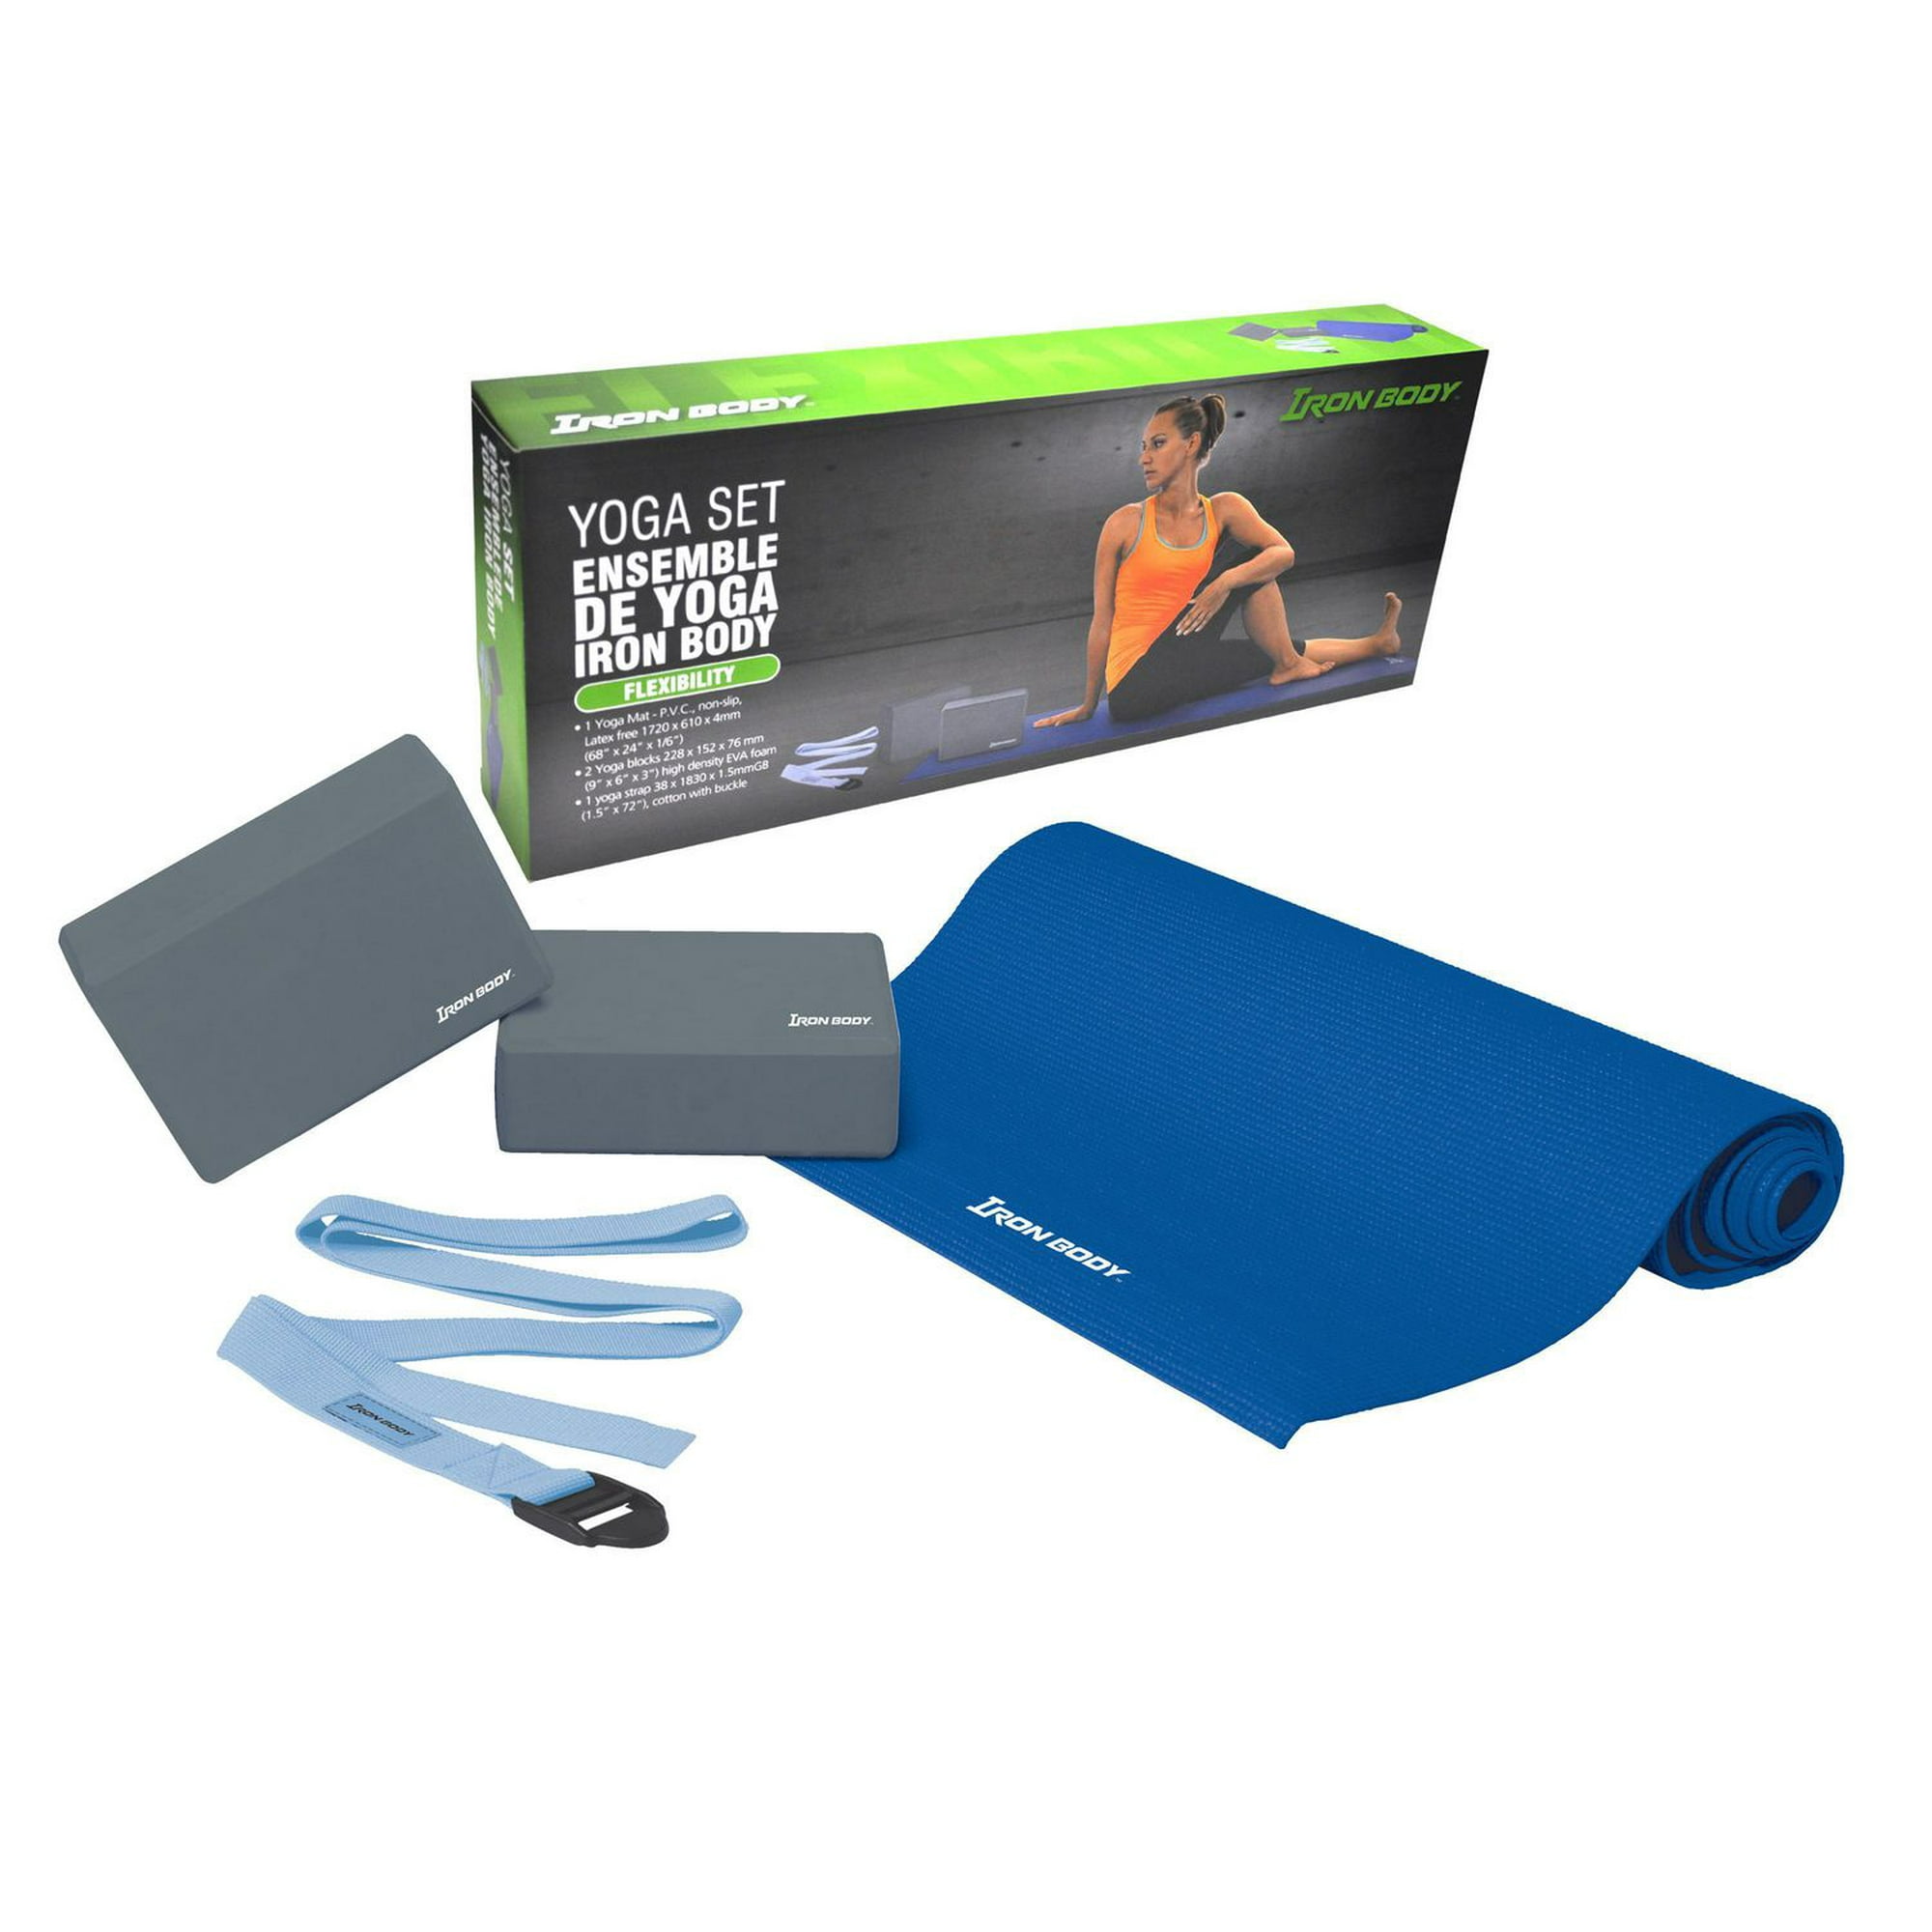 IBF 4-Piece Yoga Set by Iron Body Fitness - Includes a mat, two